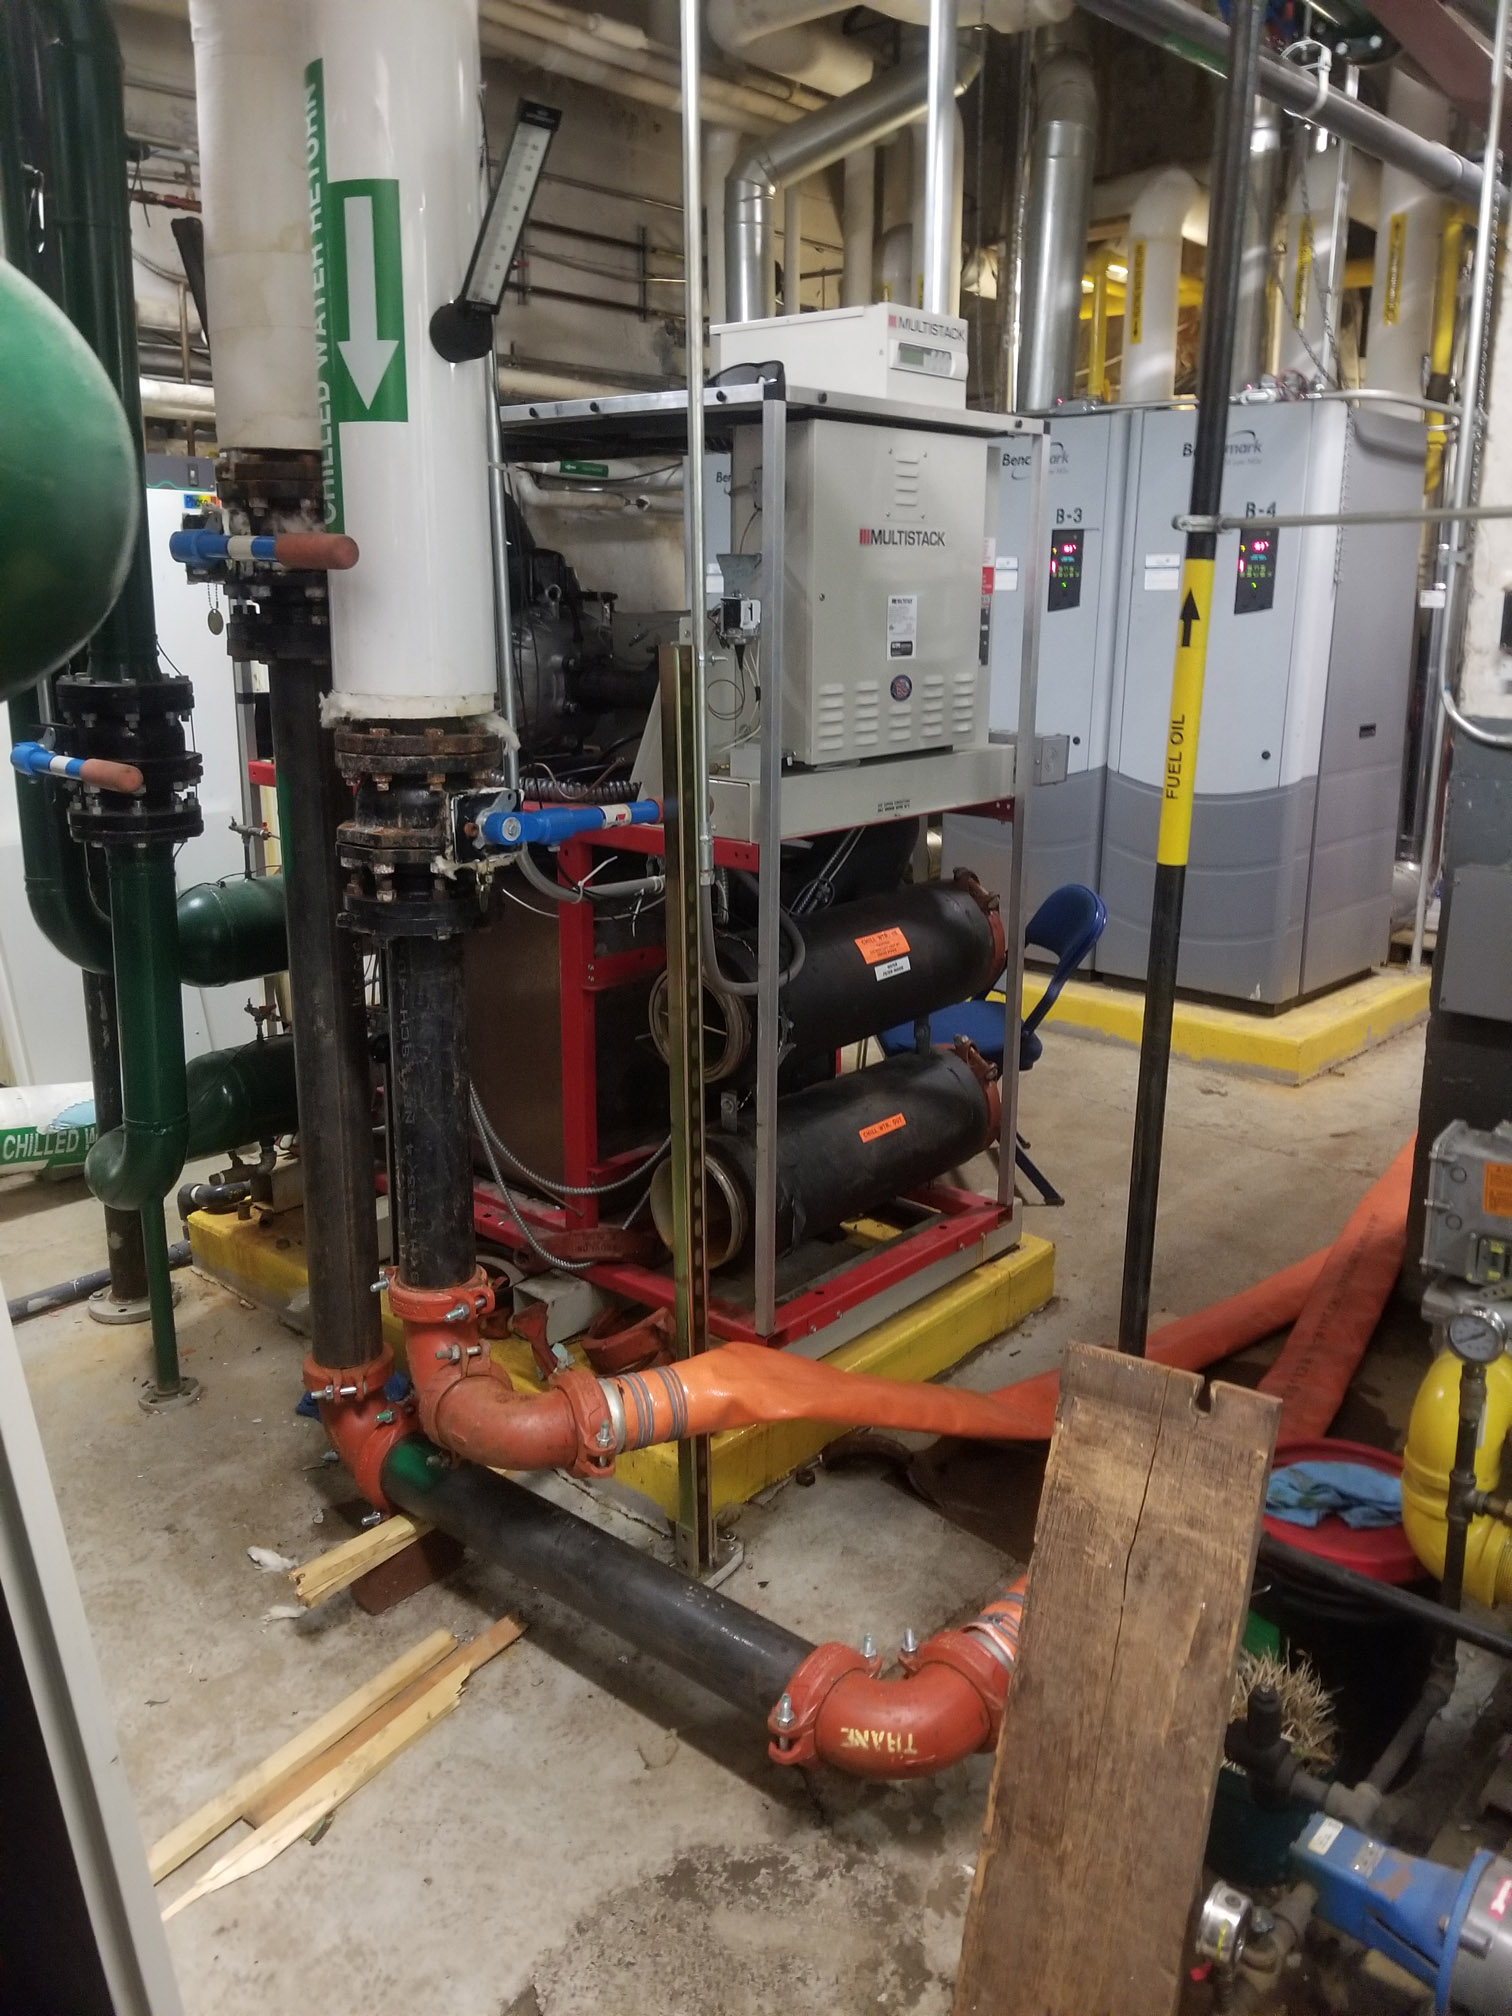 Air Cooled Chiller Rental Lafayette County FL, Chiller AC Rental Lafayette County FL, Temporary Chiller Lafayette County FL, Rental Chiller Installation Lafayette County FL